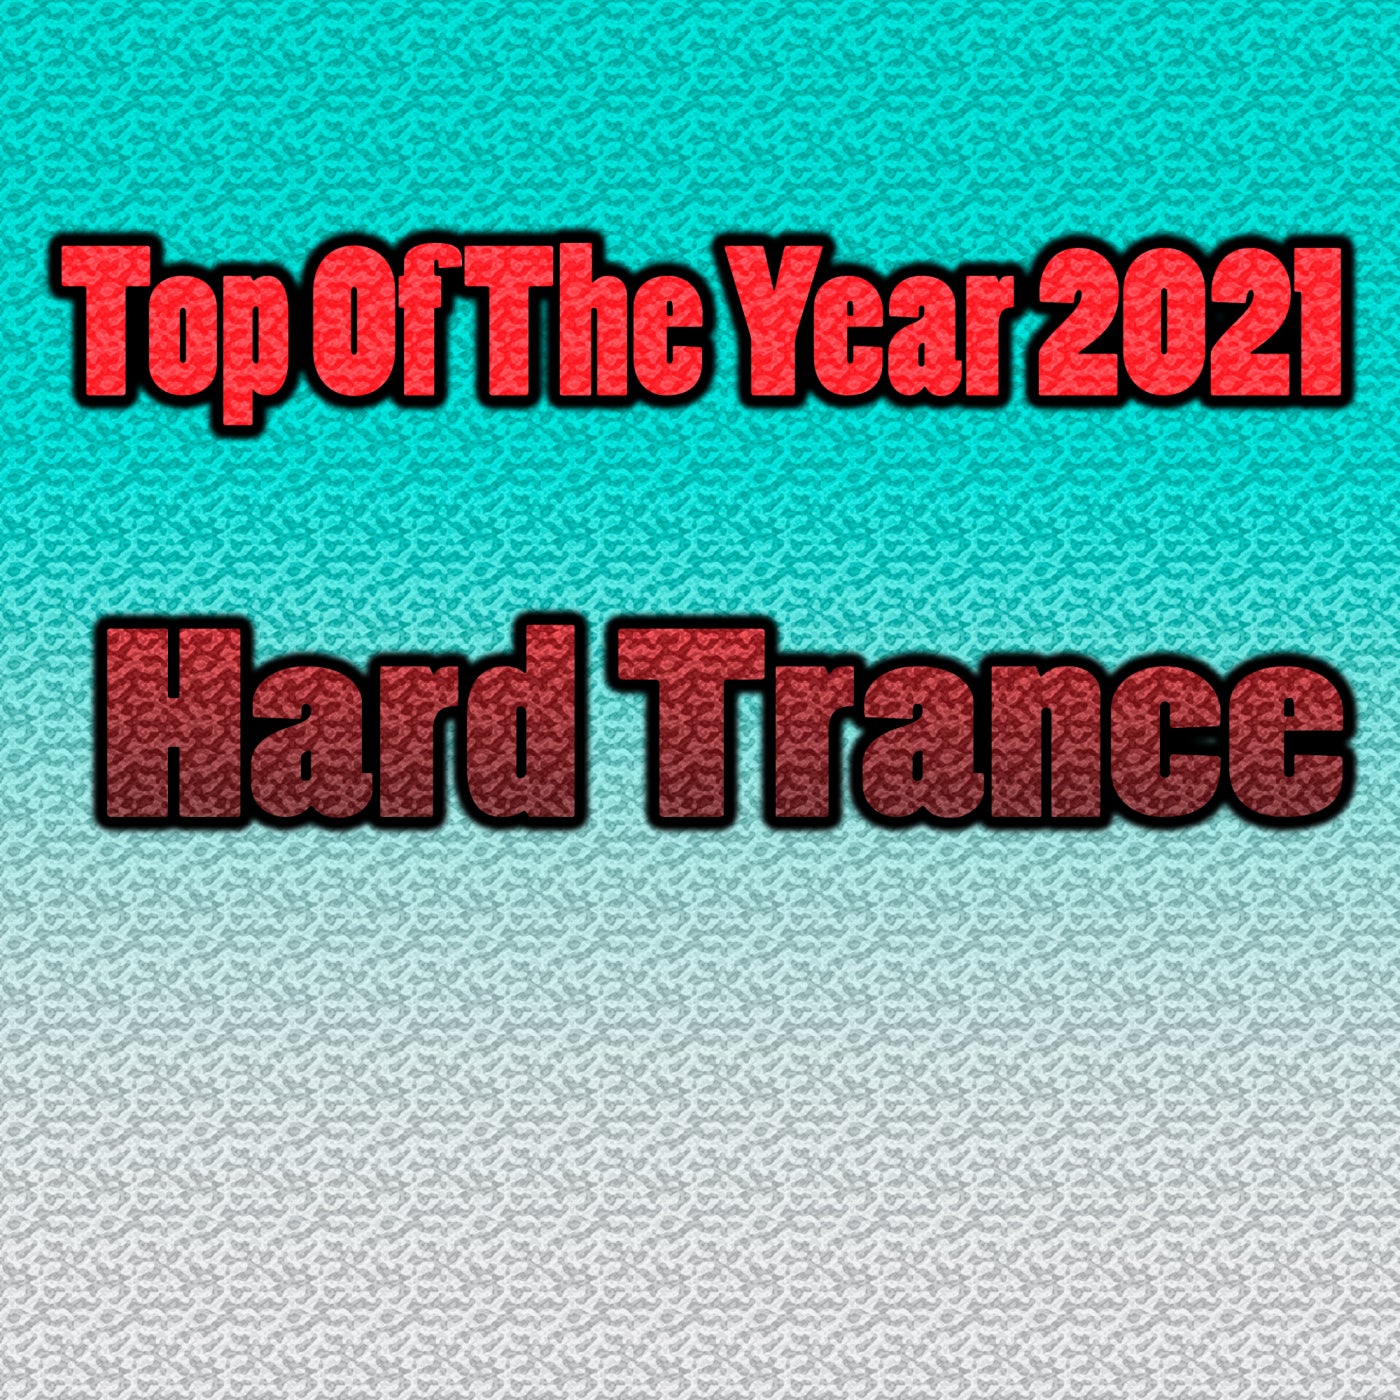 Top Of The Year 2021 Hard Trance